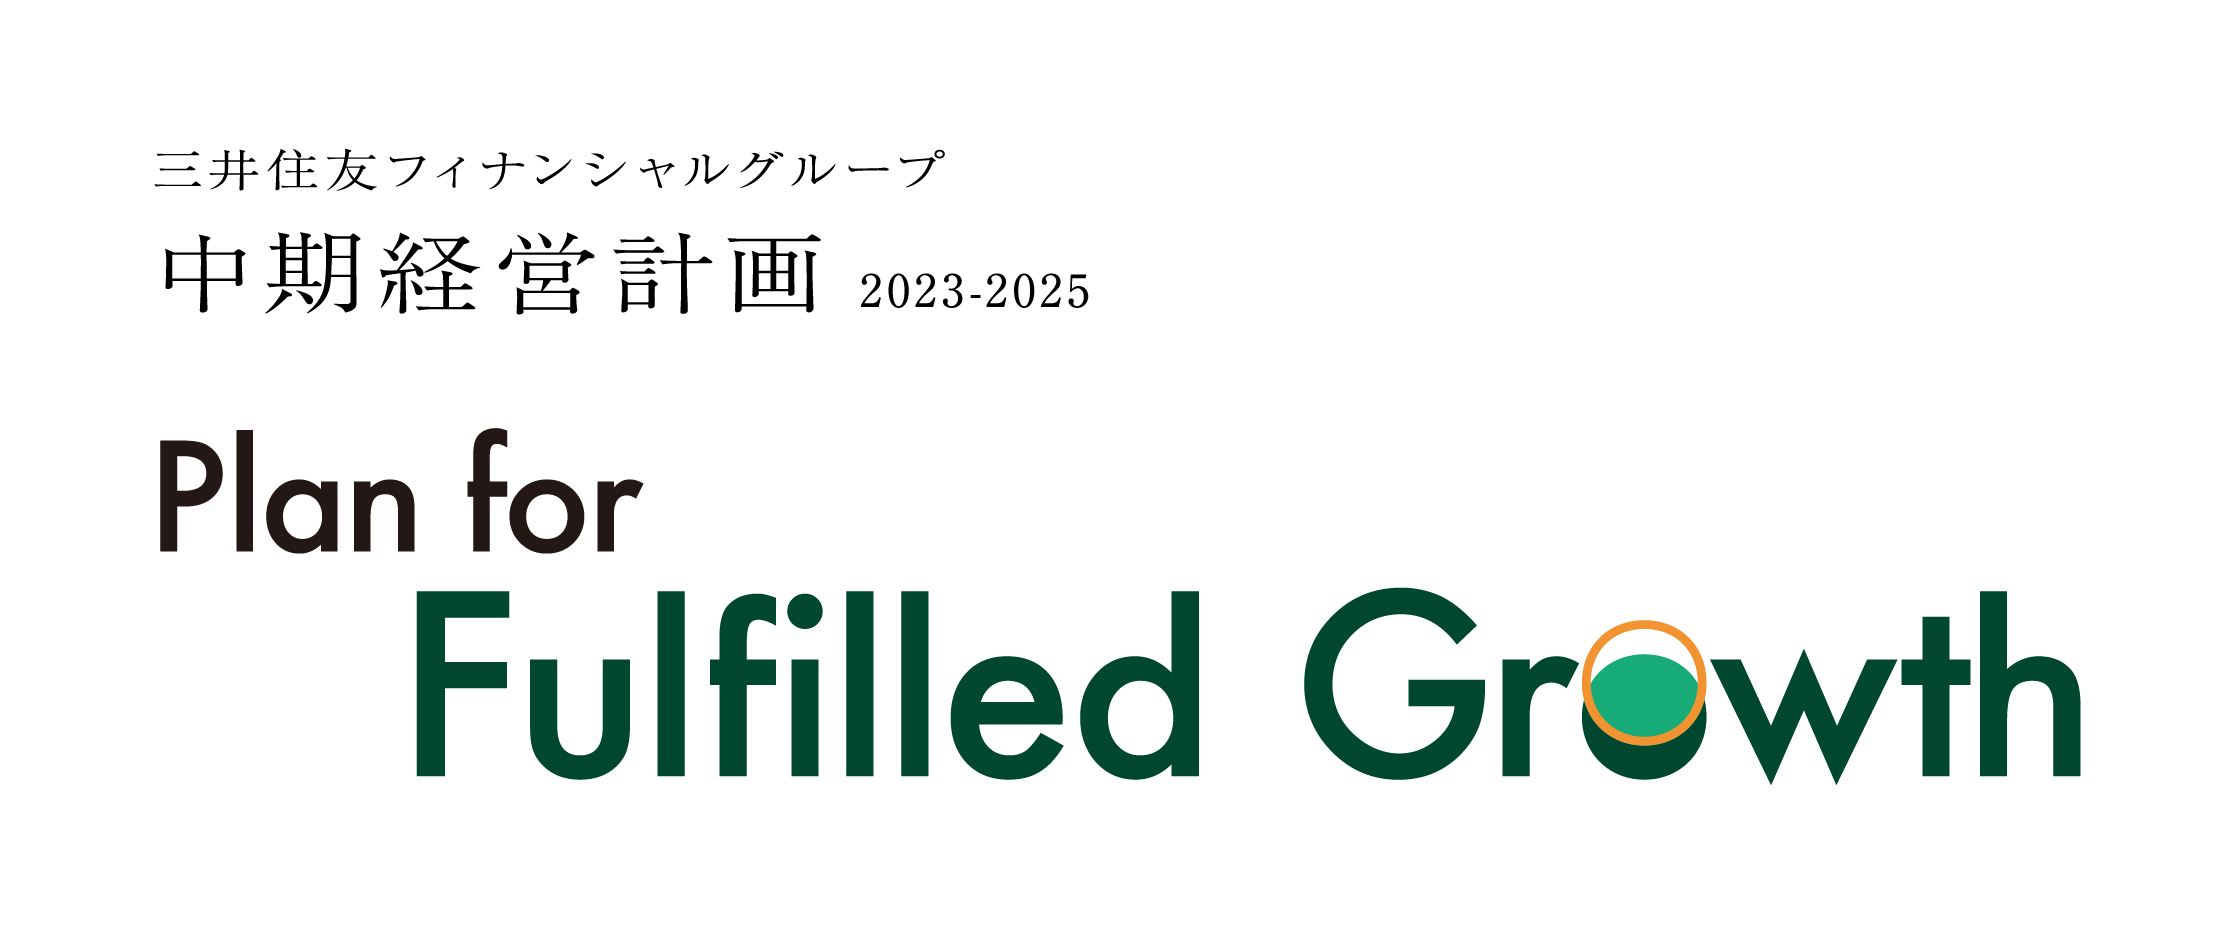 Let’s Explore!! 中期経営計画 2023-2025三井住友フィナンシャルグループ Plan for Fulfilled Growth